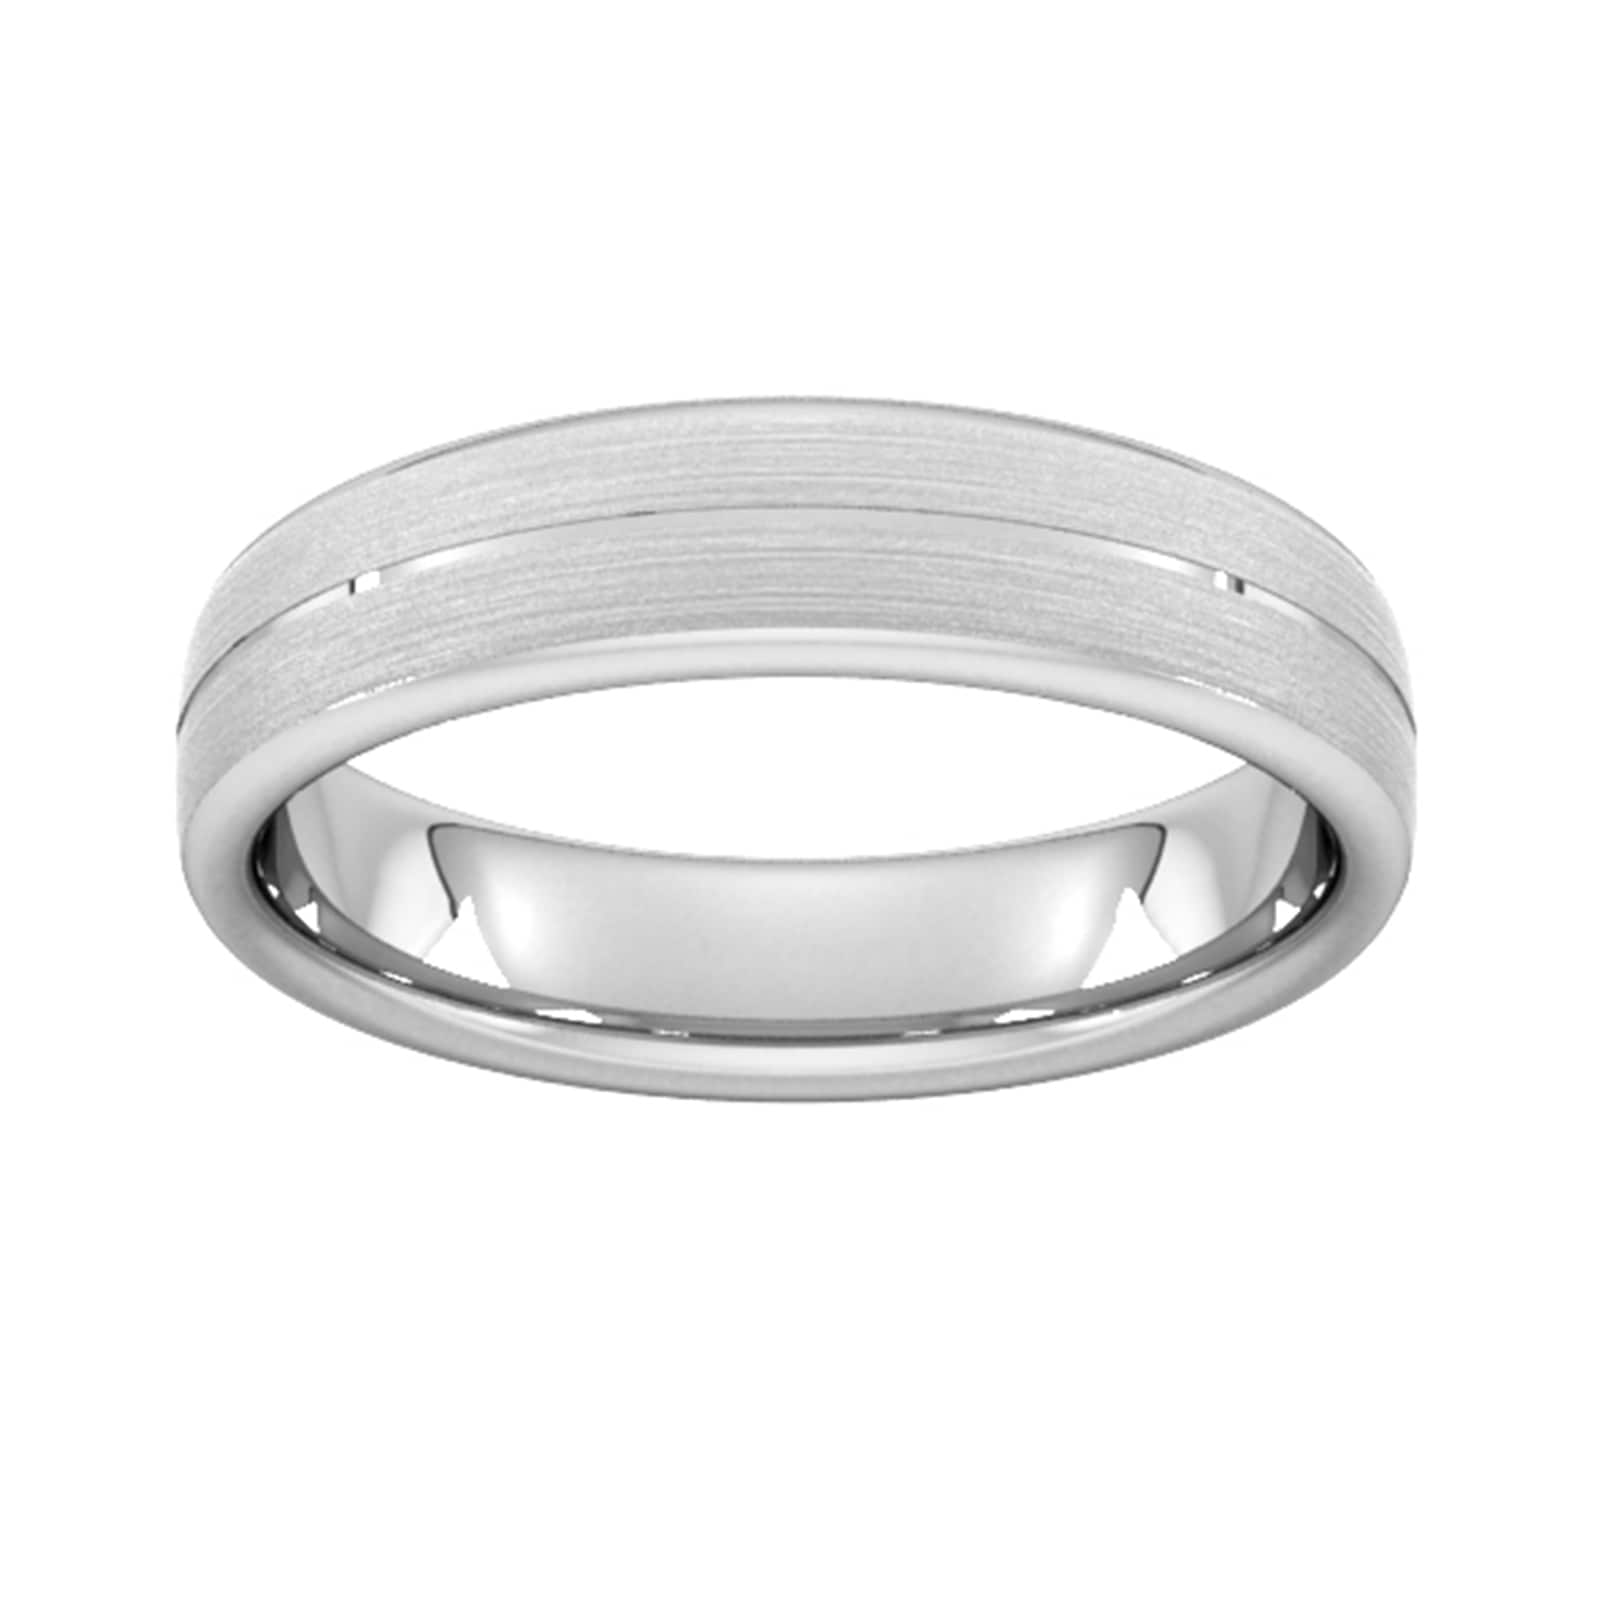 5mm Flat Court Heavy Centre Groove With Chamfered Edge Wedding Ring In 18 Carat White Gold - Ring Size T